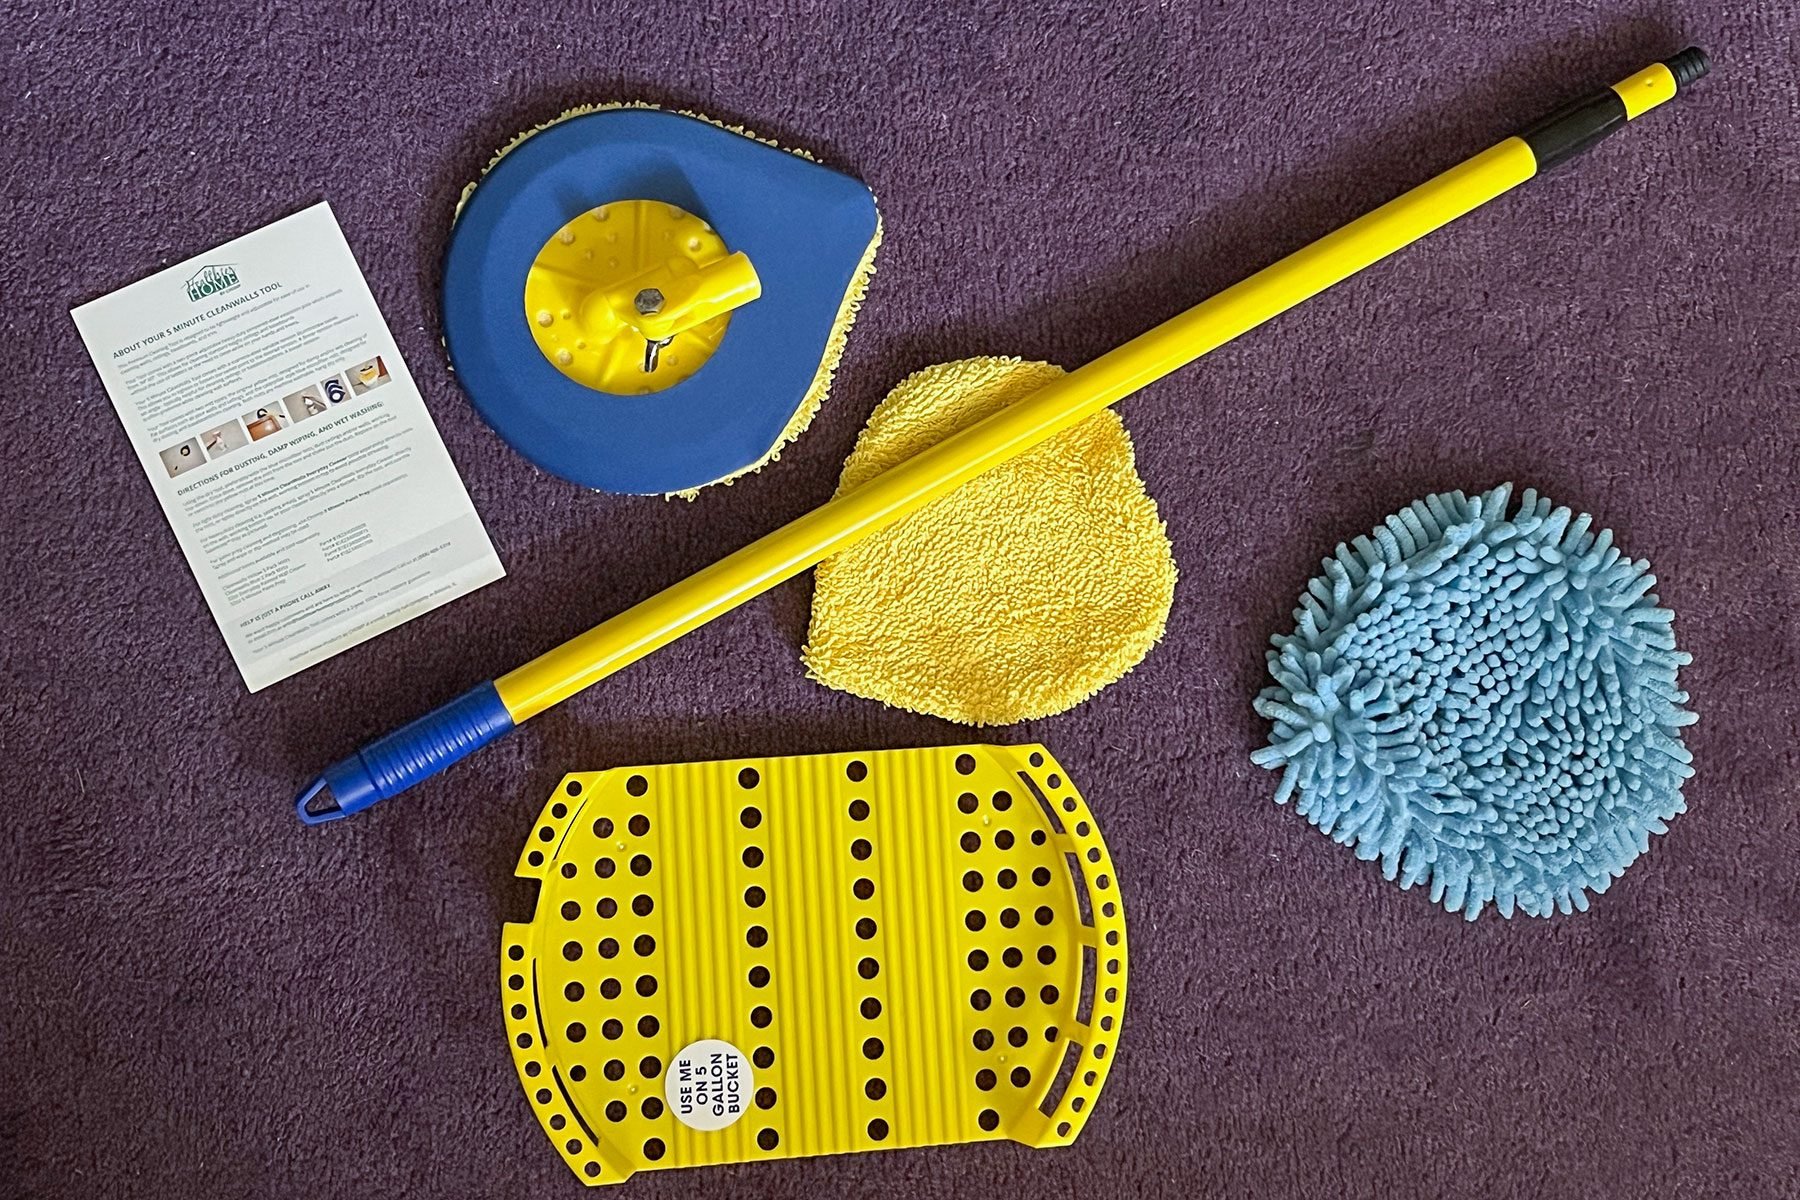 Best Mops for Cleaning Walls: Best Wall-Cleaning Mops to Buy Online